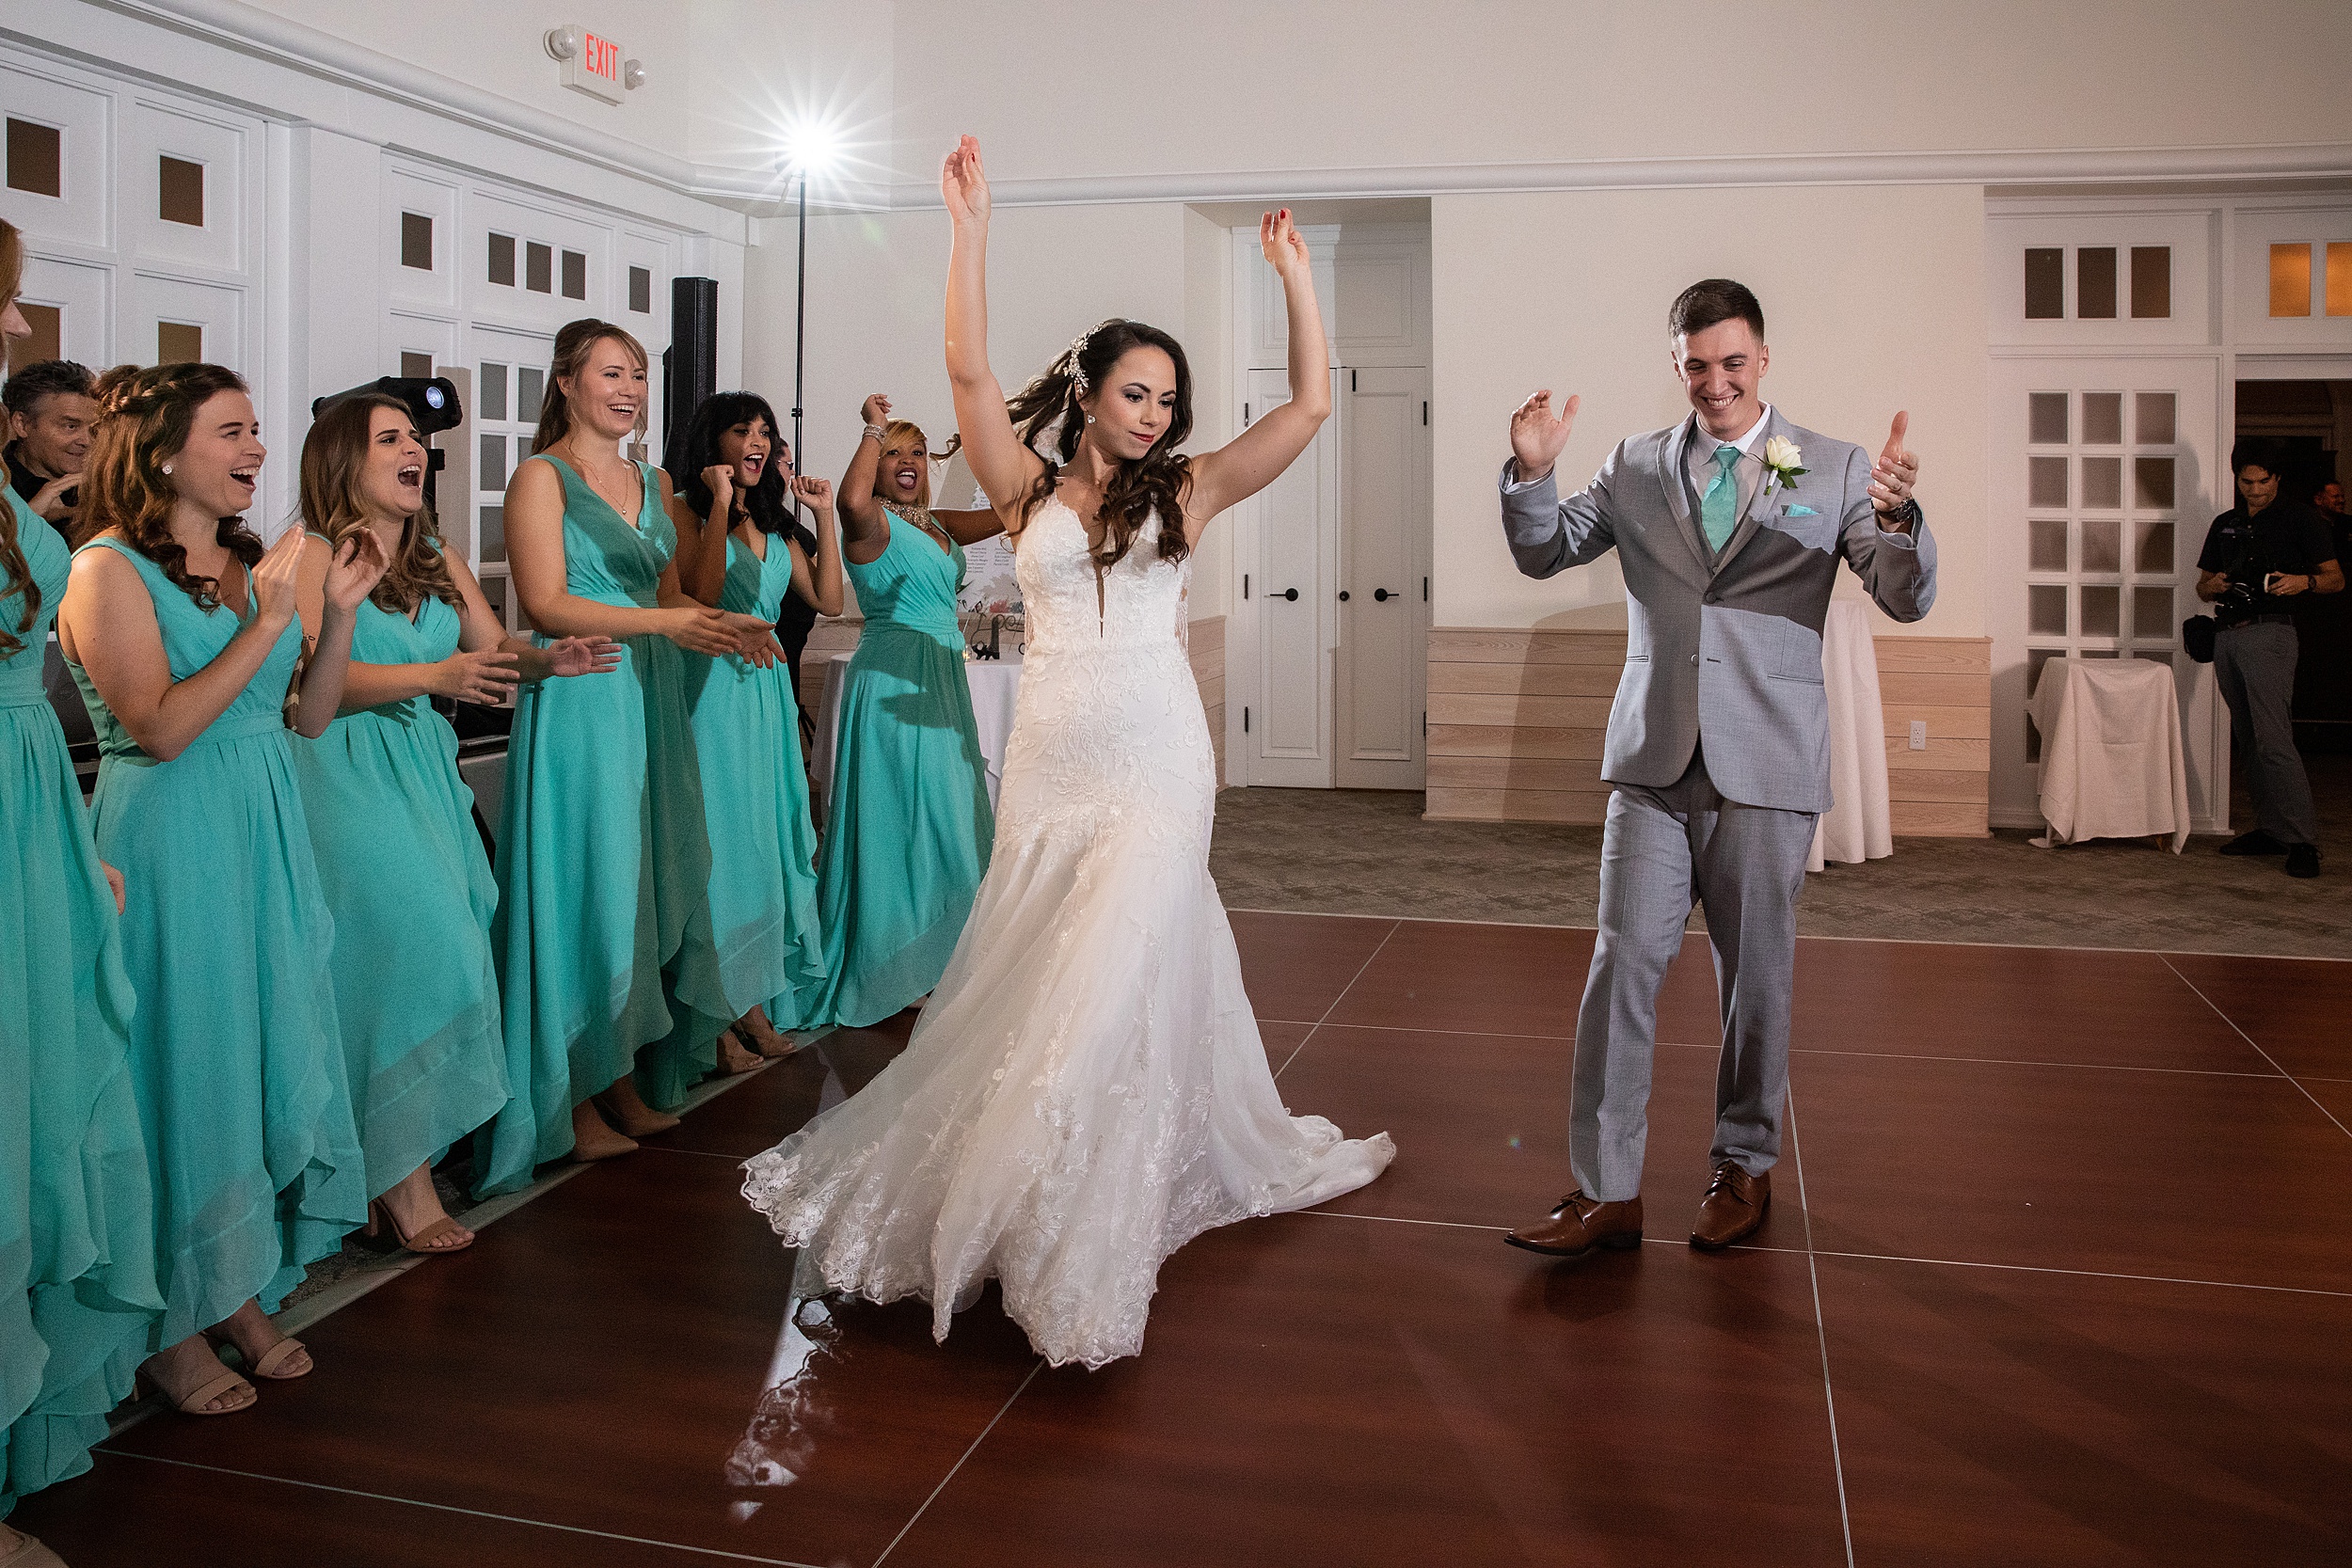 A bride and groom command a dance floor with their bridal party for the first time as a married couple